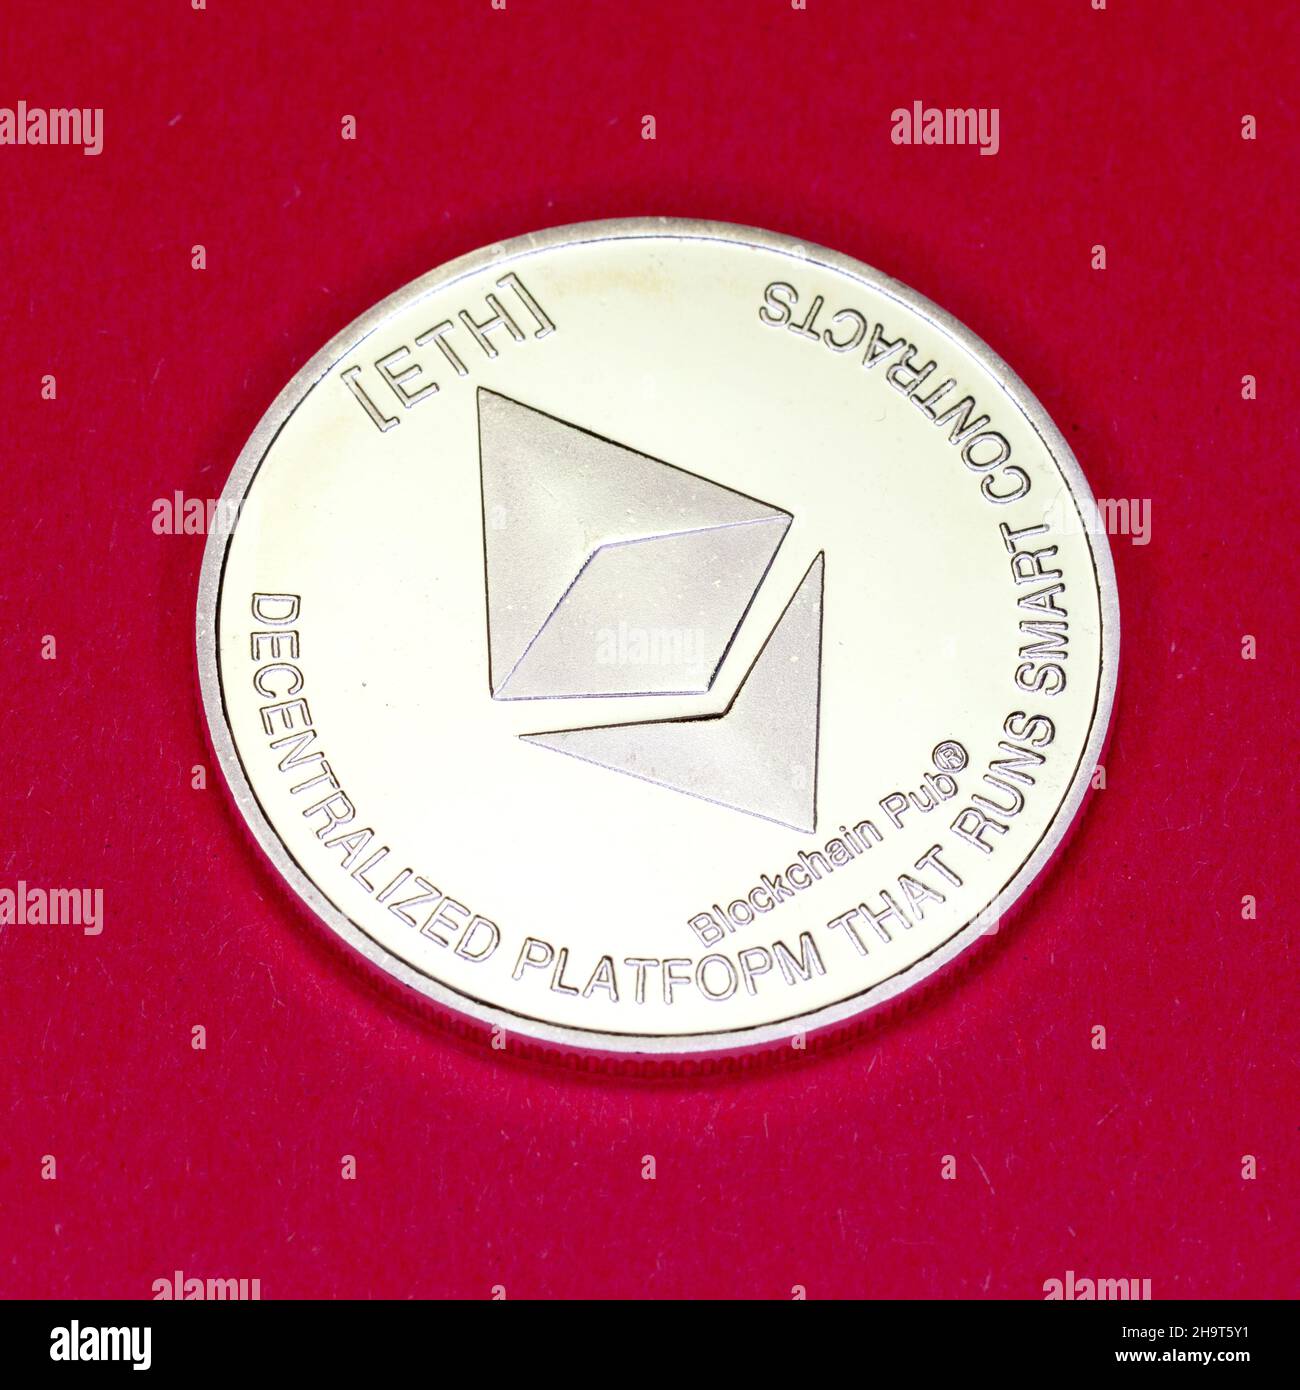 Cryptocurrency Ethereum physical coin. Stock Photo